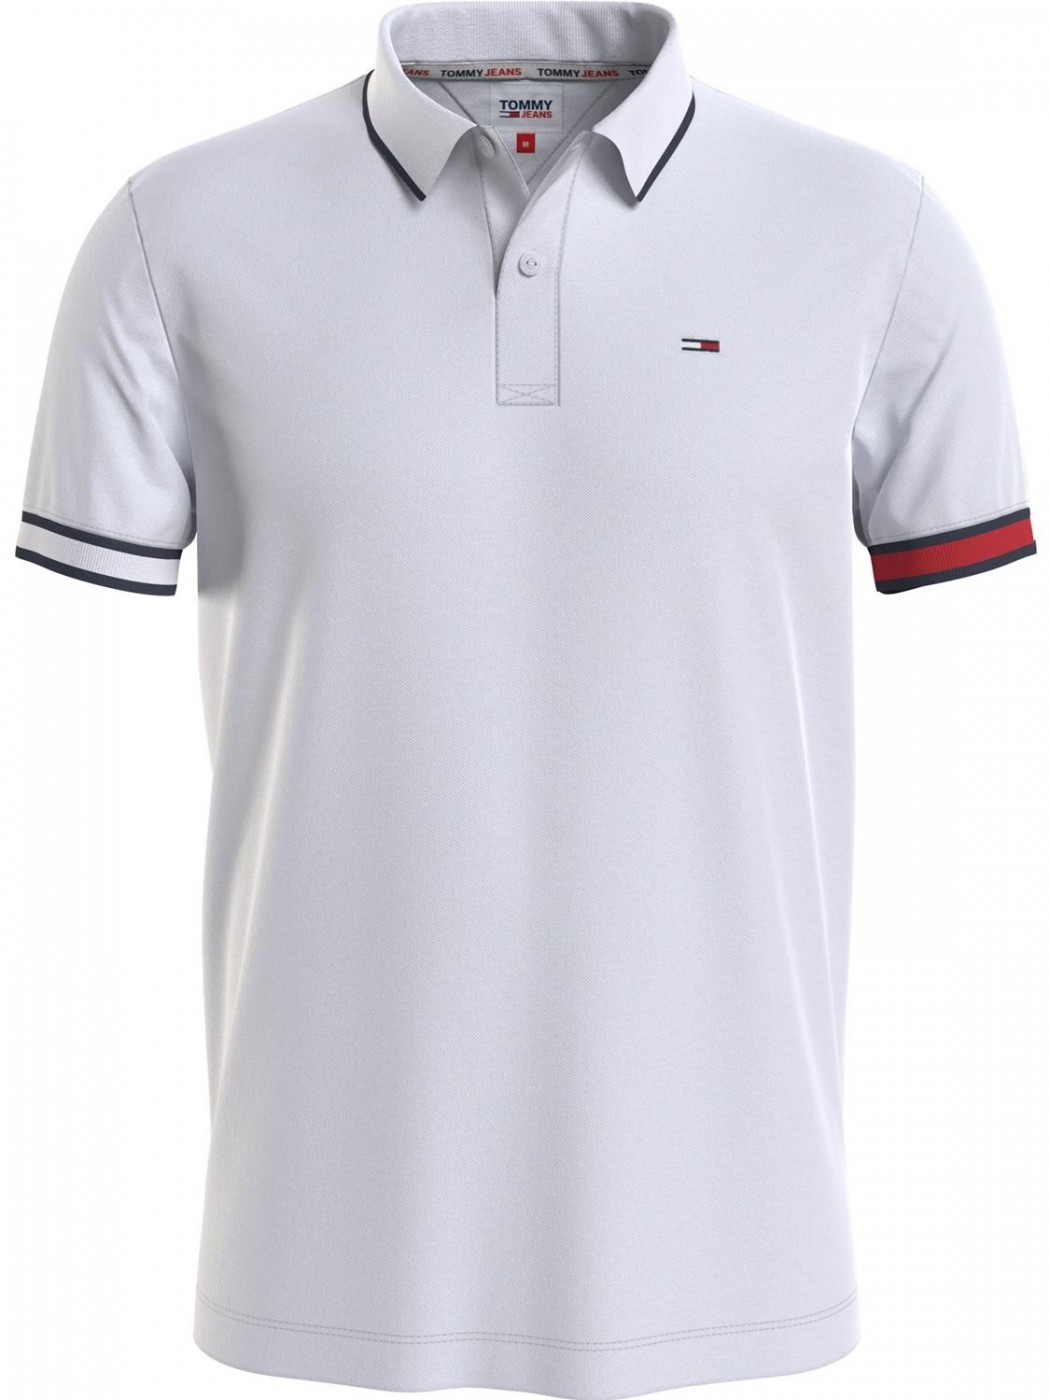 POLO TOMMY JEANS HOMBRE TJM...